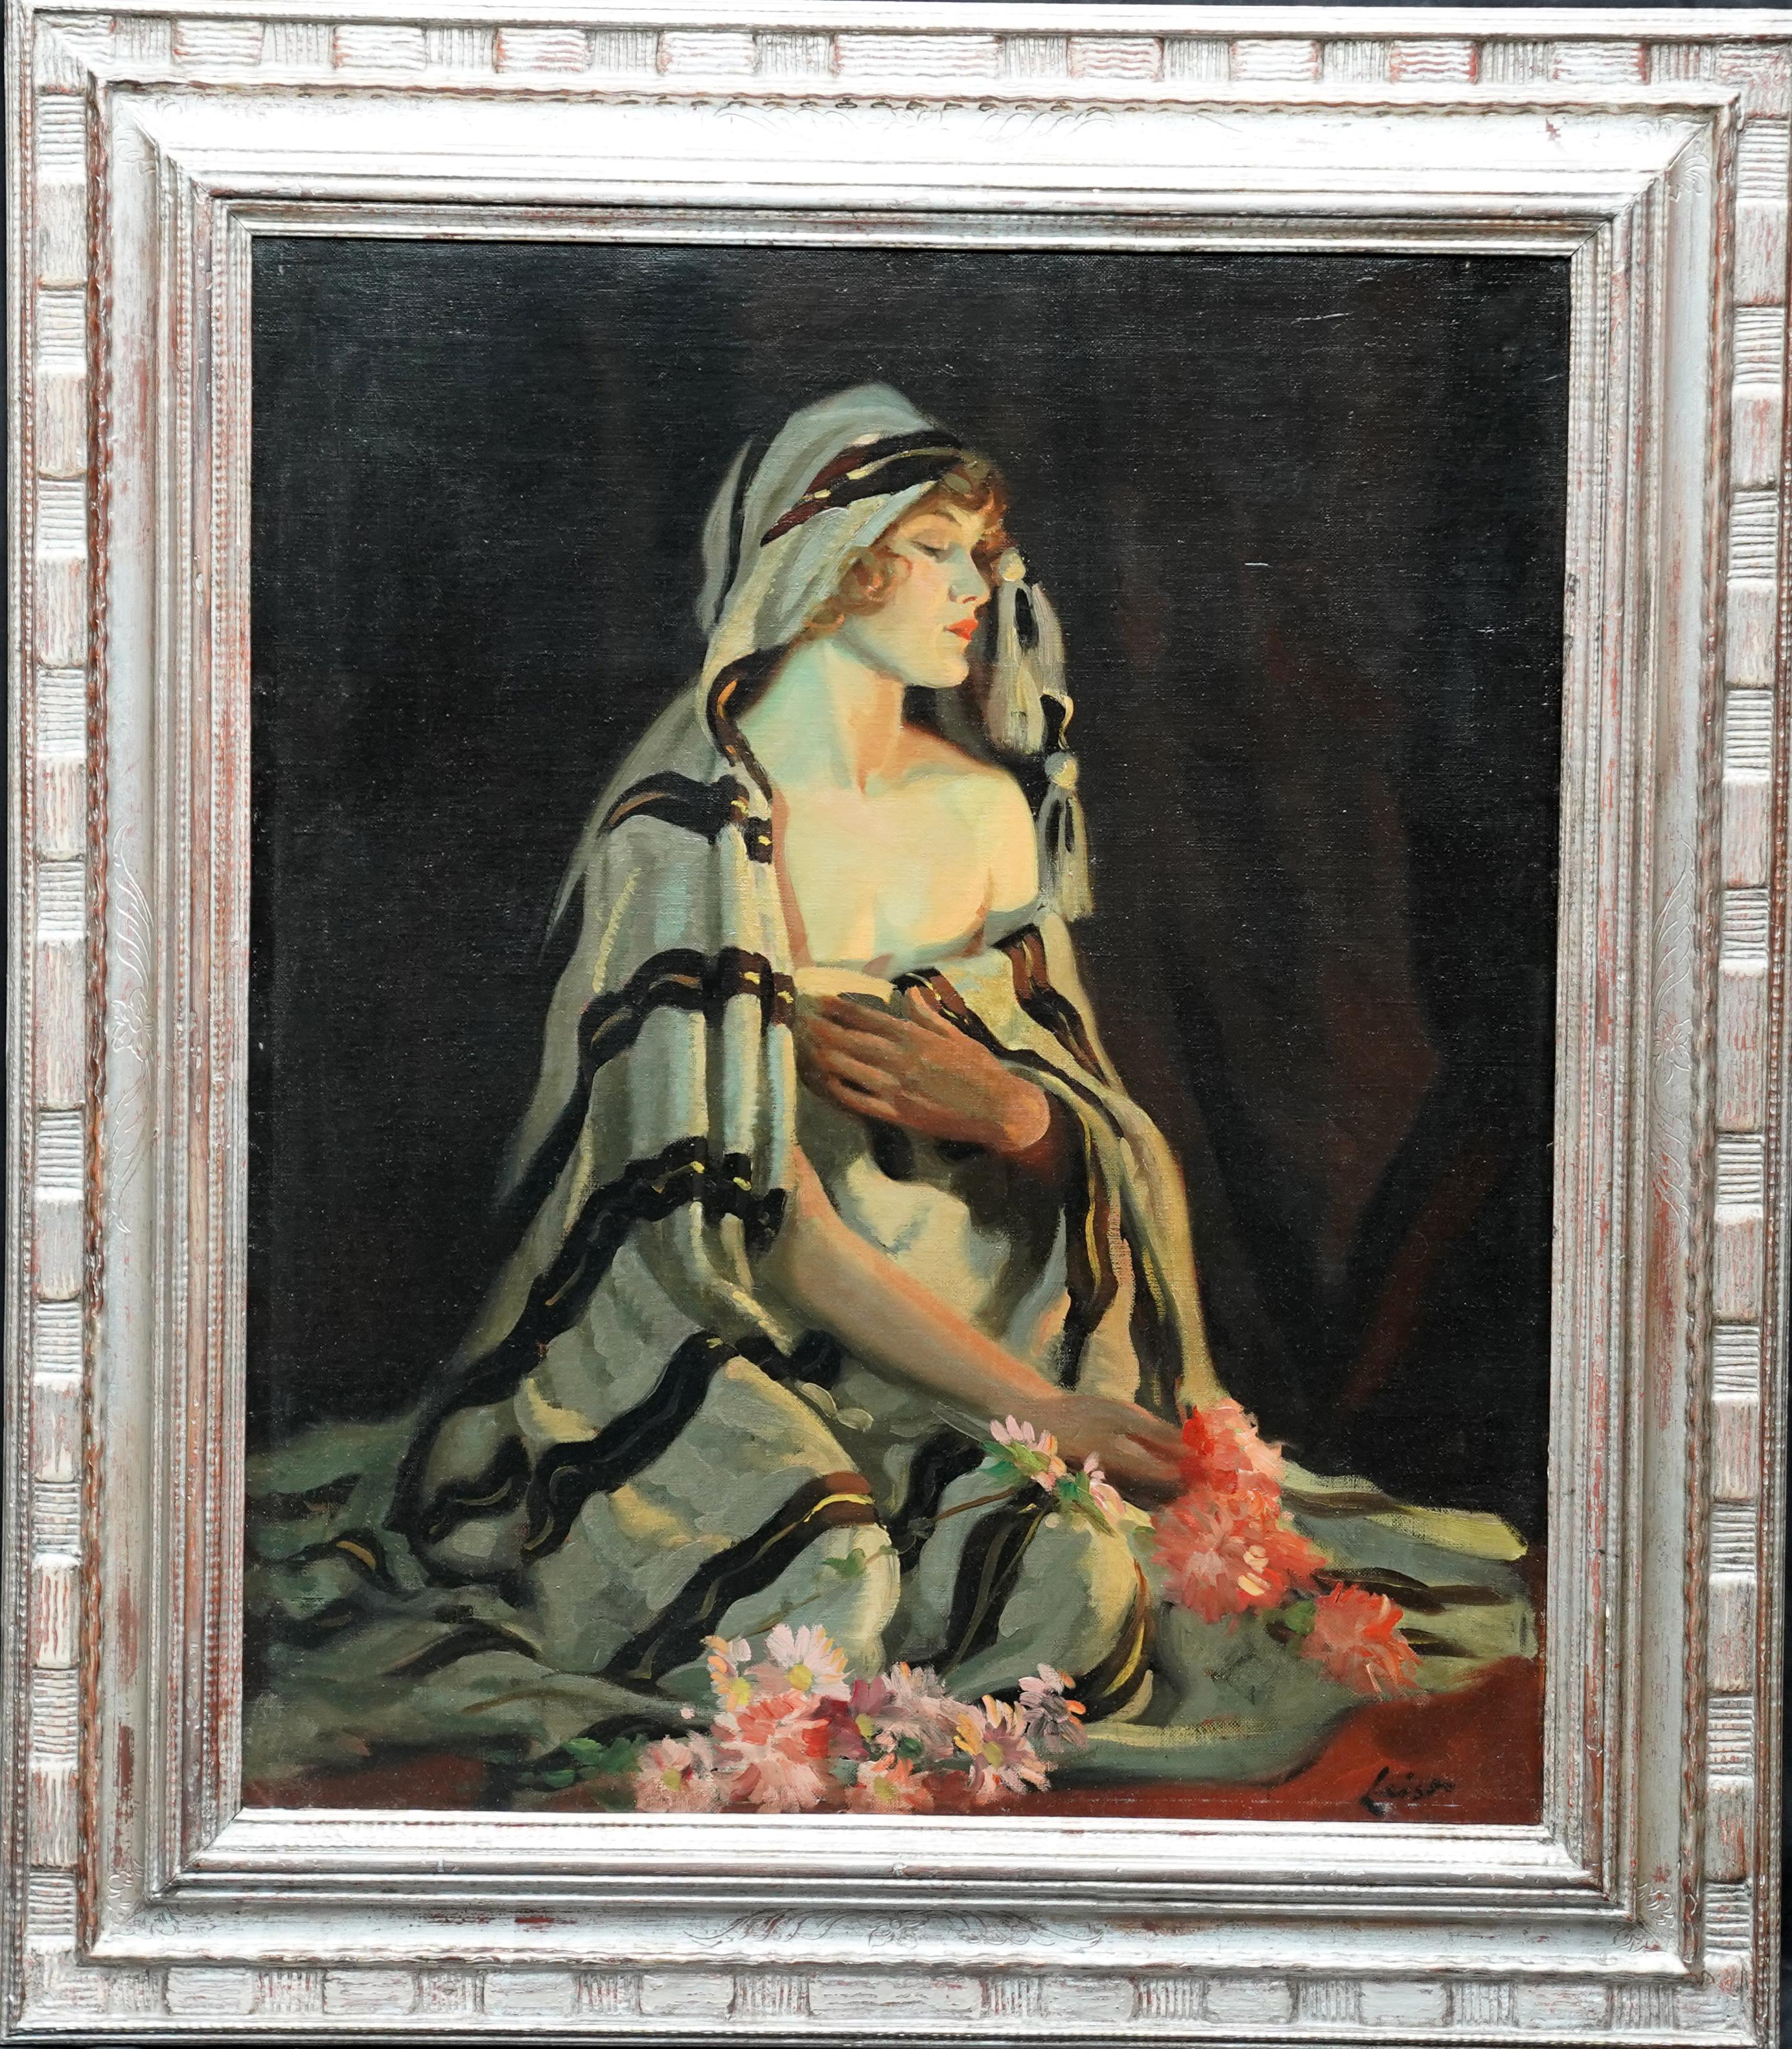 Frederick William Leist Portrait Painting - Lost in Thought - Australian art 1920's portrait oil painting woman flowers